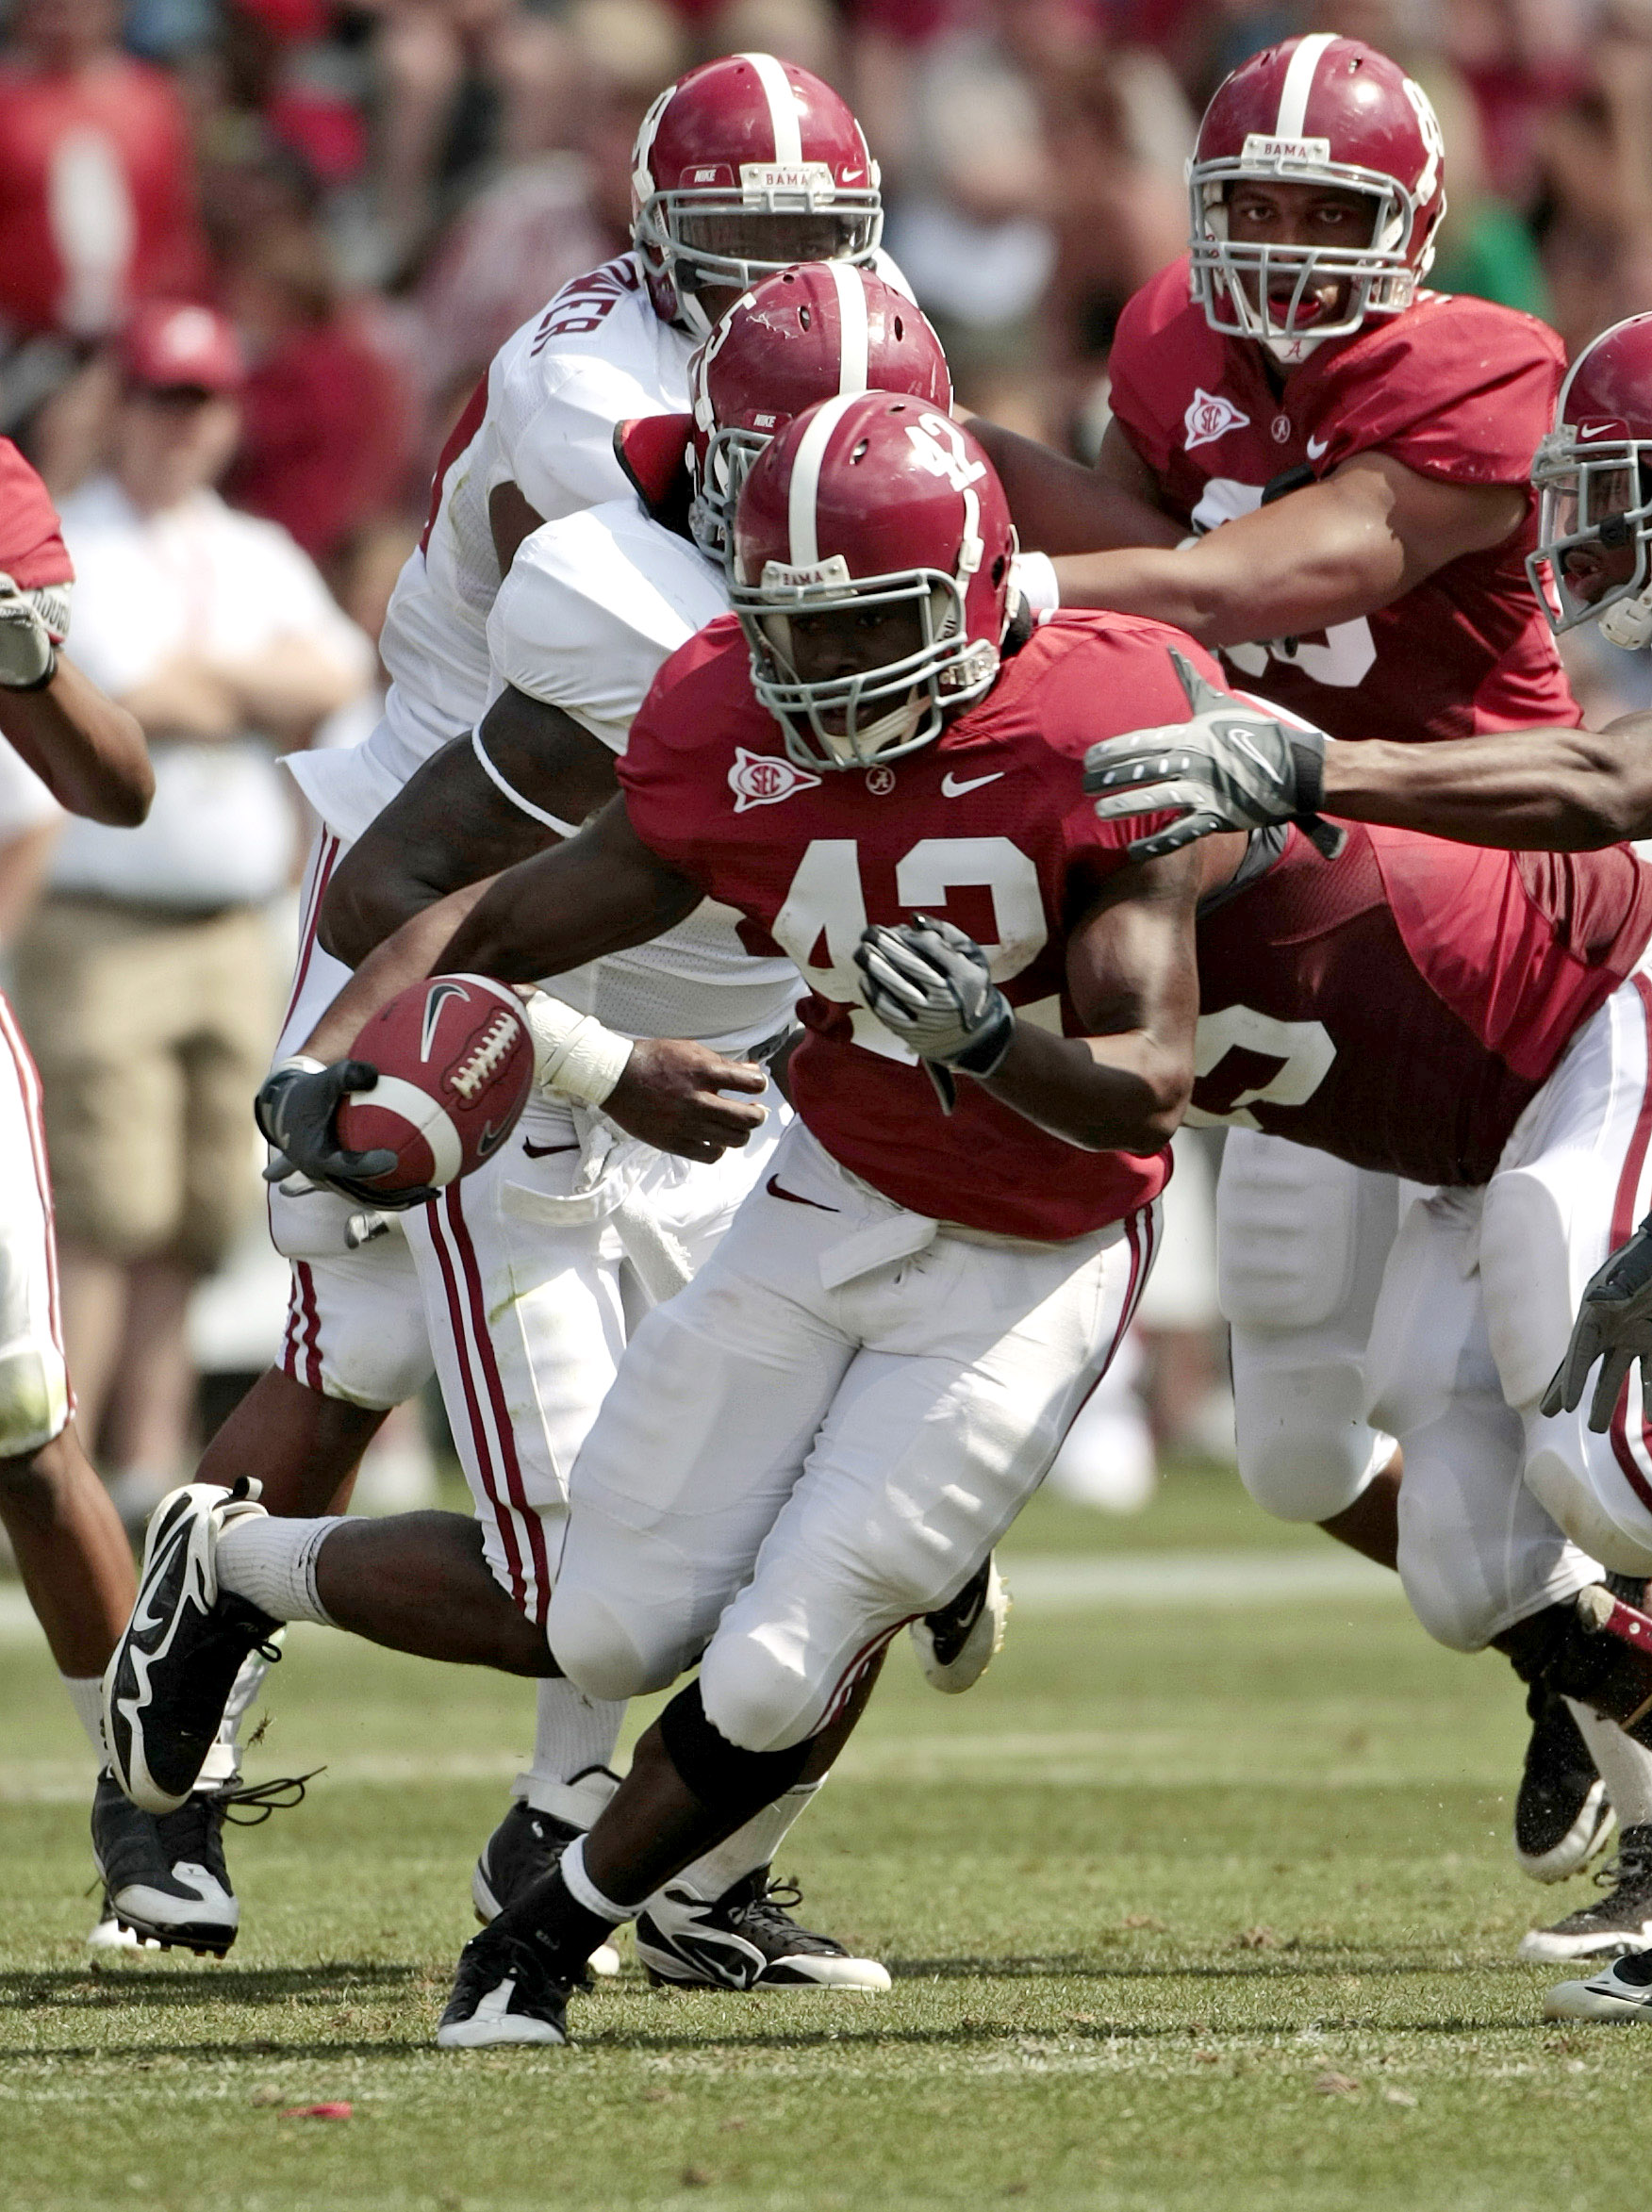 Alabama Spring Practice 13 Bold Predictions for the Alabama ADay Game